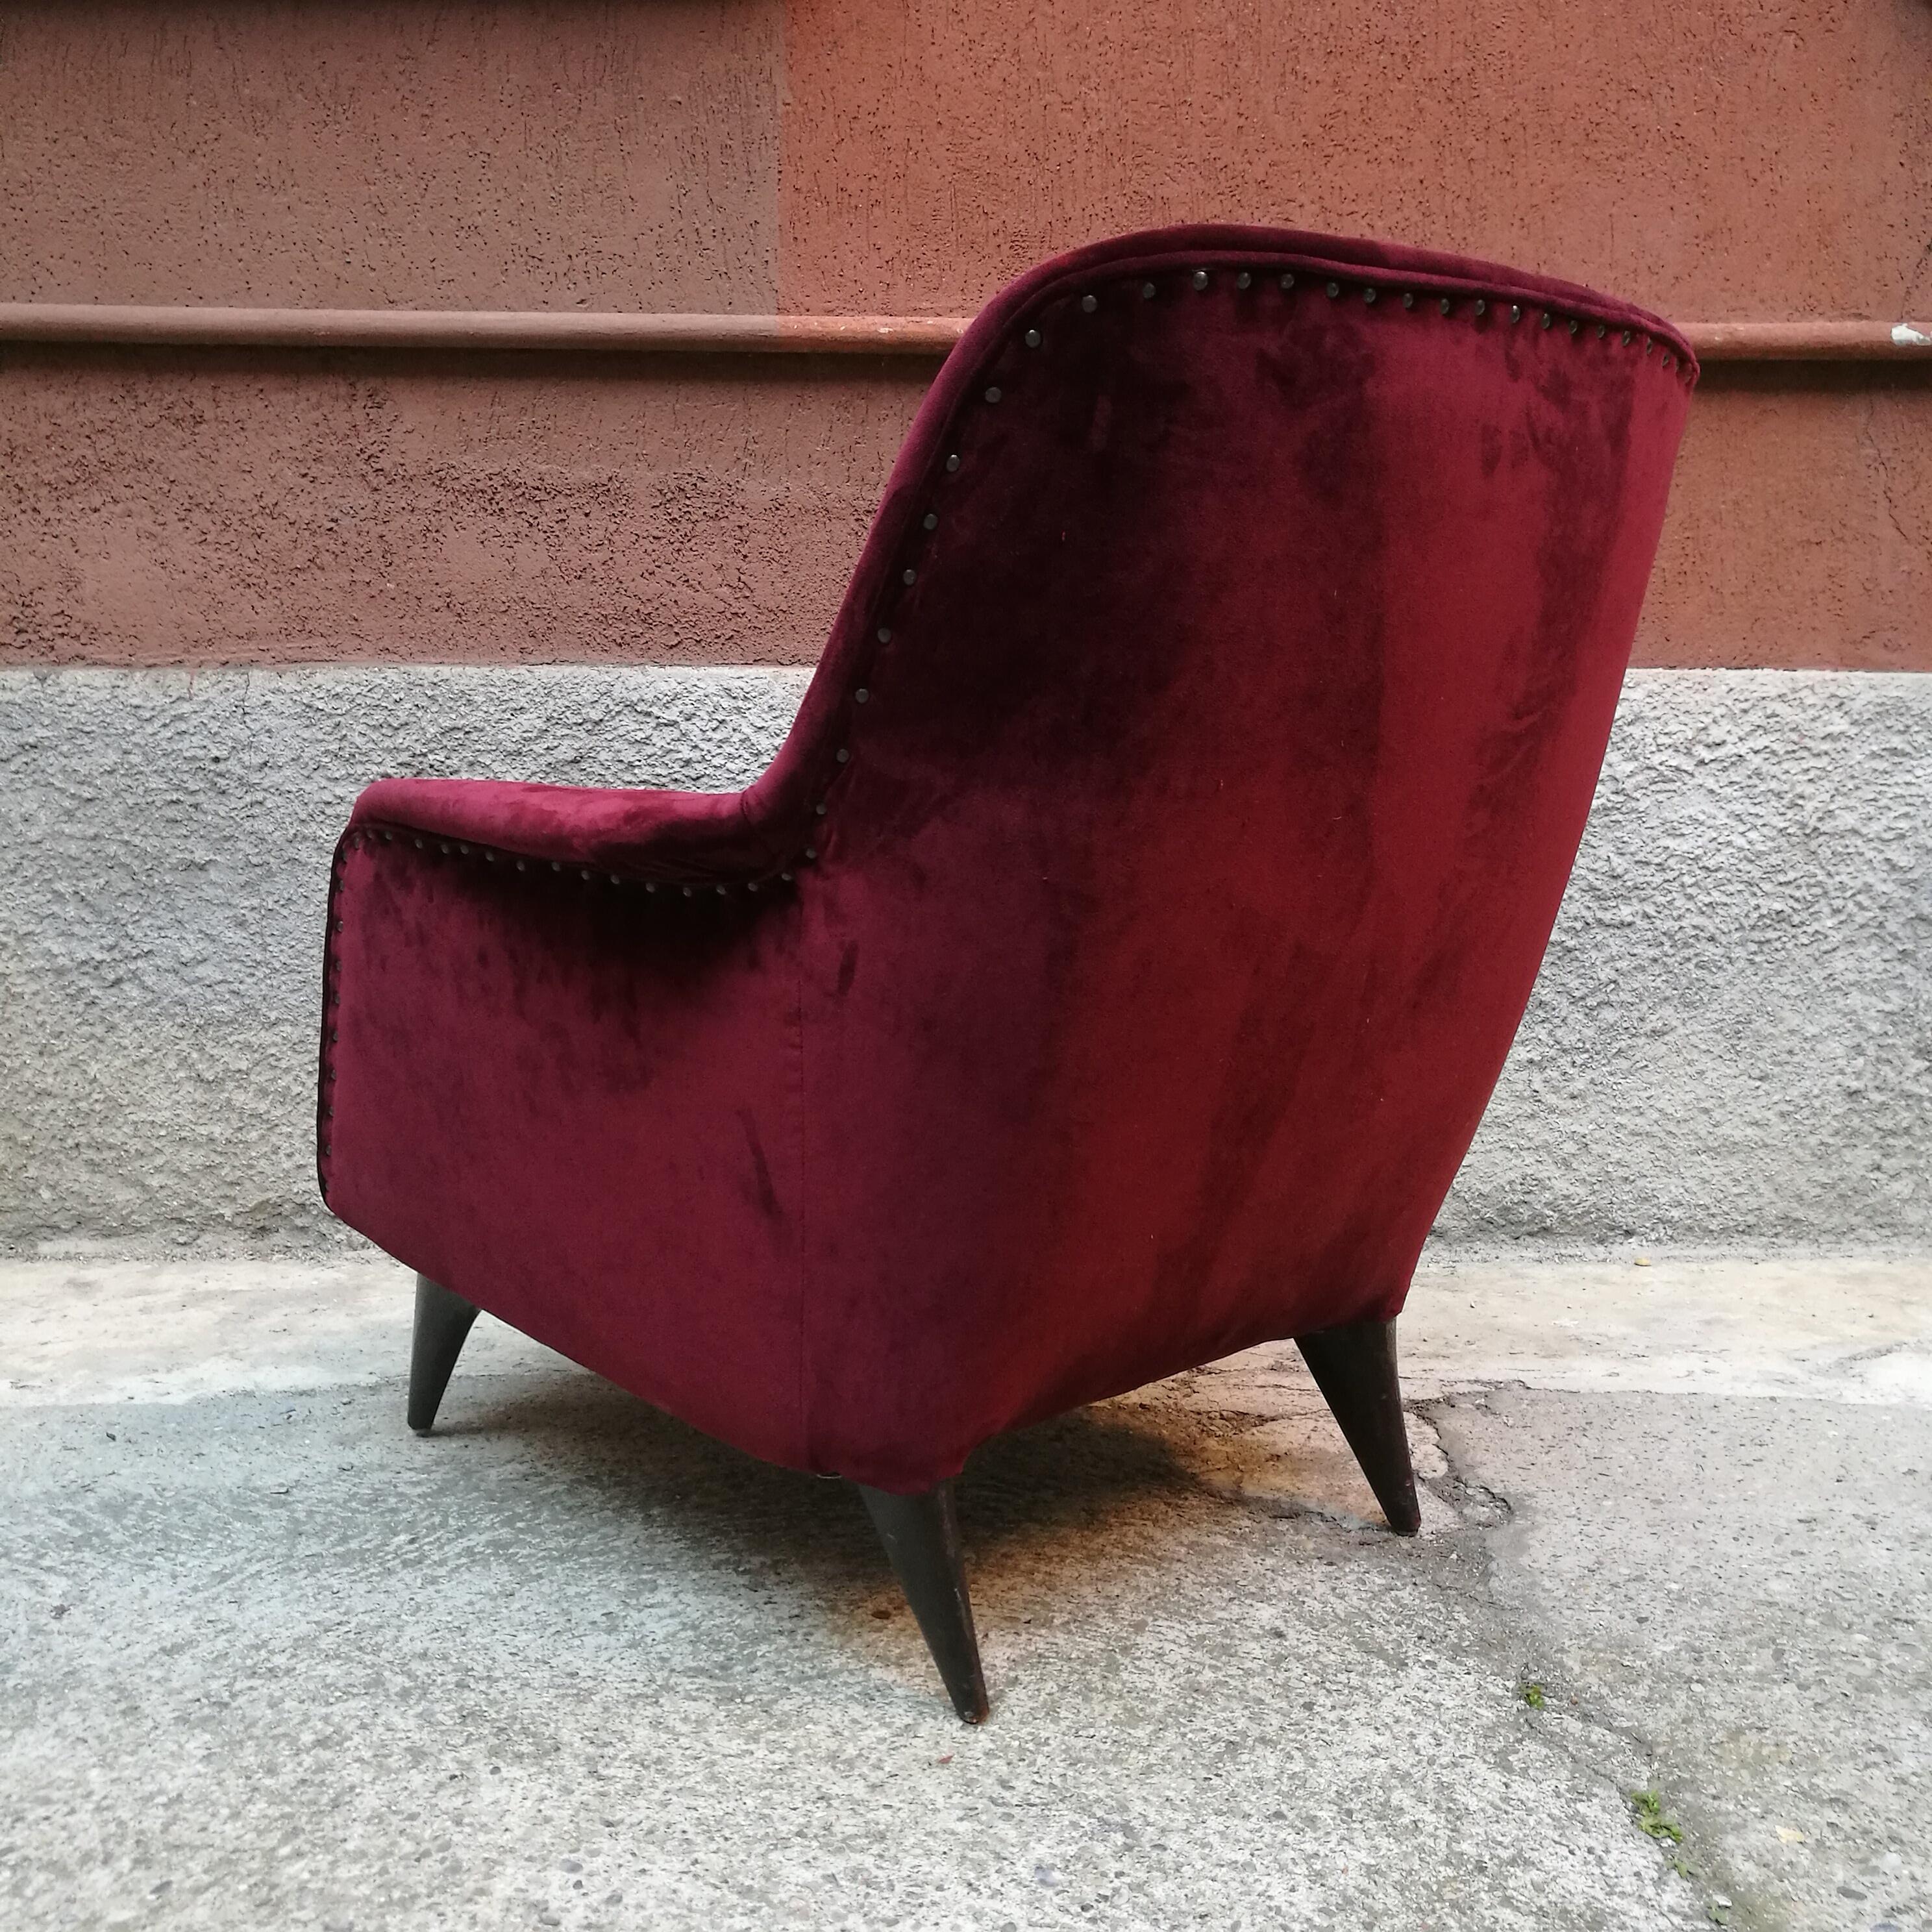 Purple Velvet Armchair, Carlo de Carli for Cassina, Italy 1950
Amazing armchair from Carlo De Carli, Cassina, Italy.
Reupholstered with a fantastic velvet purple. Legs in nut wood
The armchairs are in perfect conditions and conserve the original